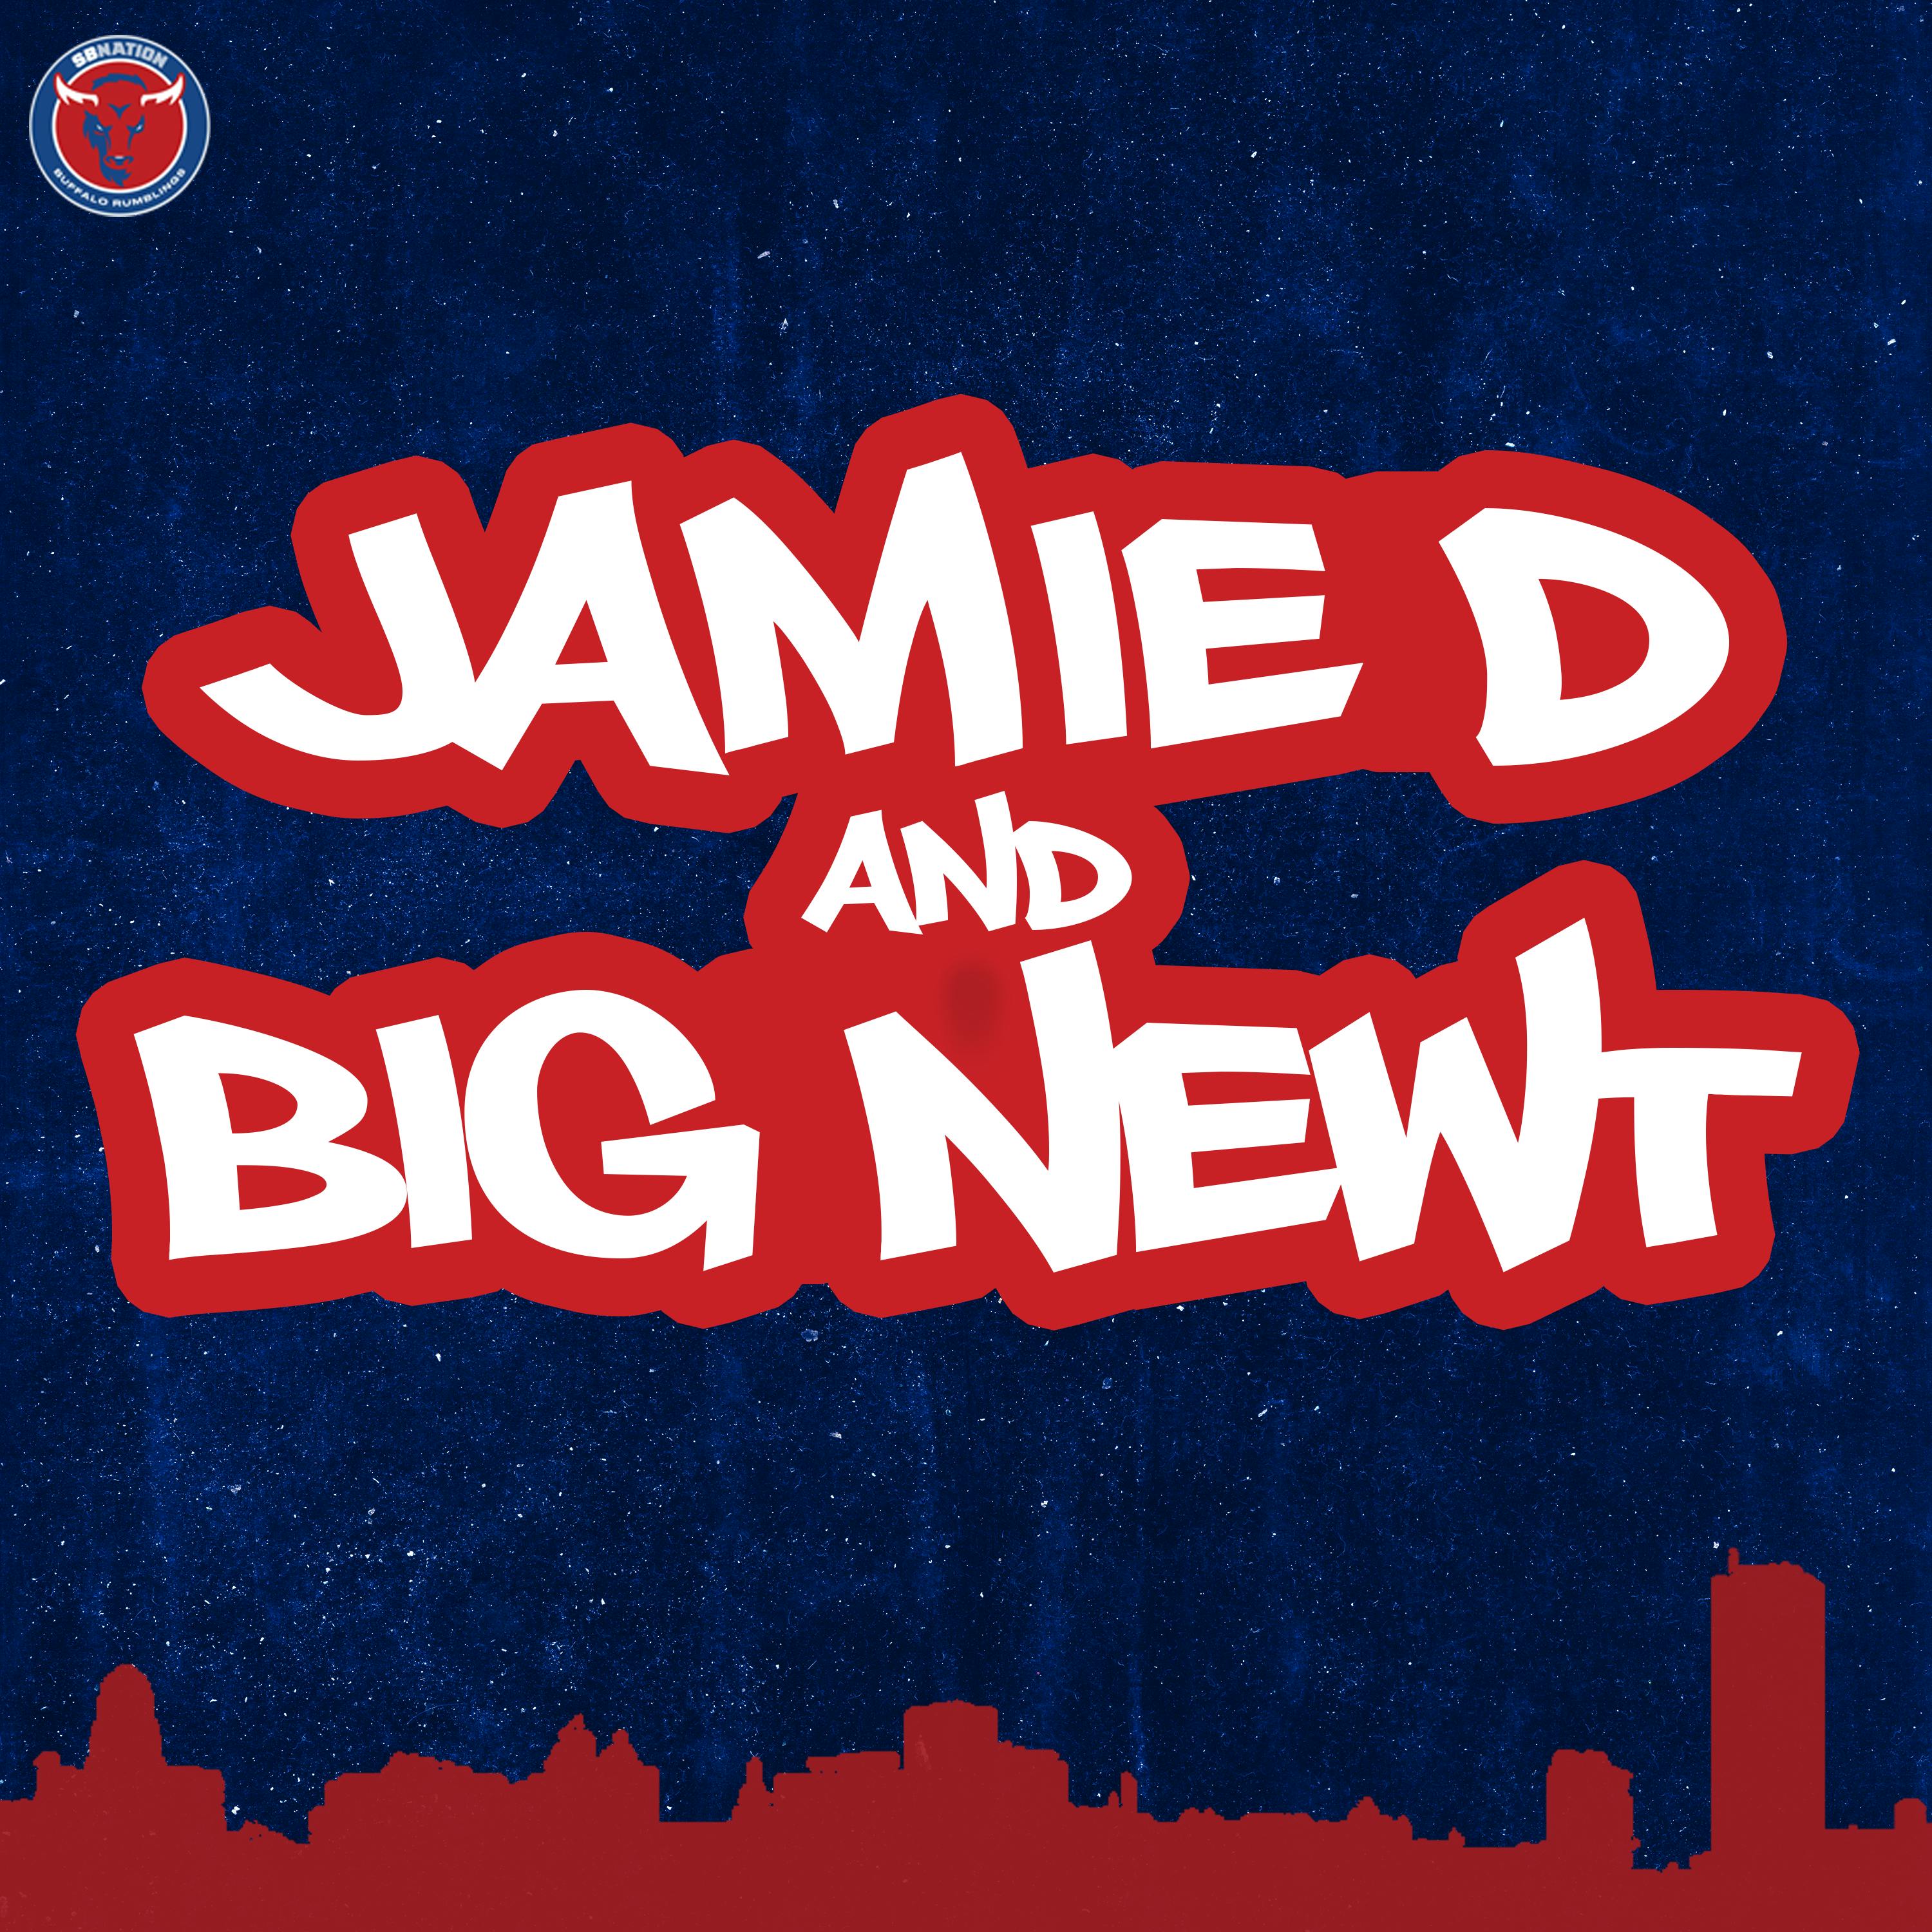 Jamie D & Big Newt: Overcoming sloppy weather and play against the Ravens